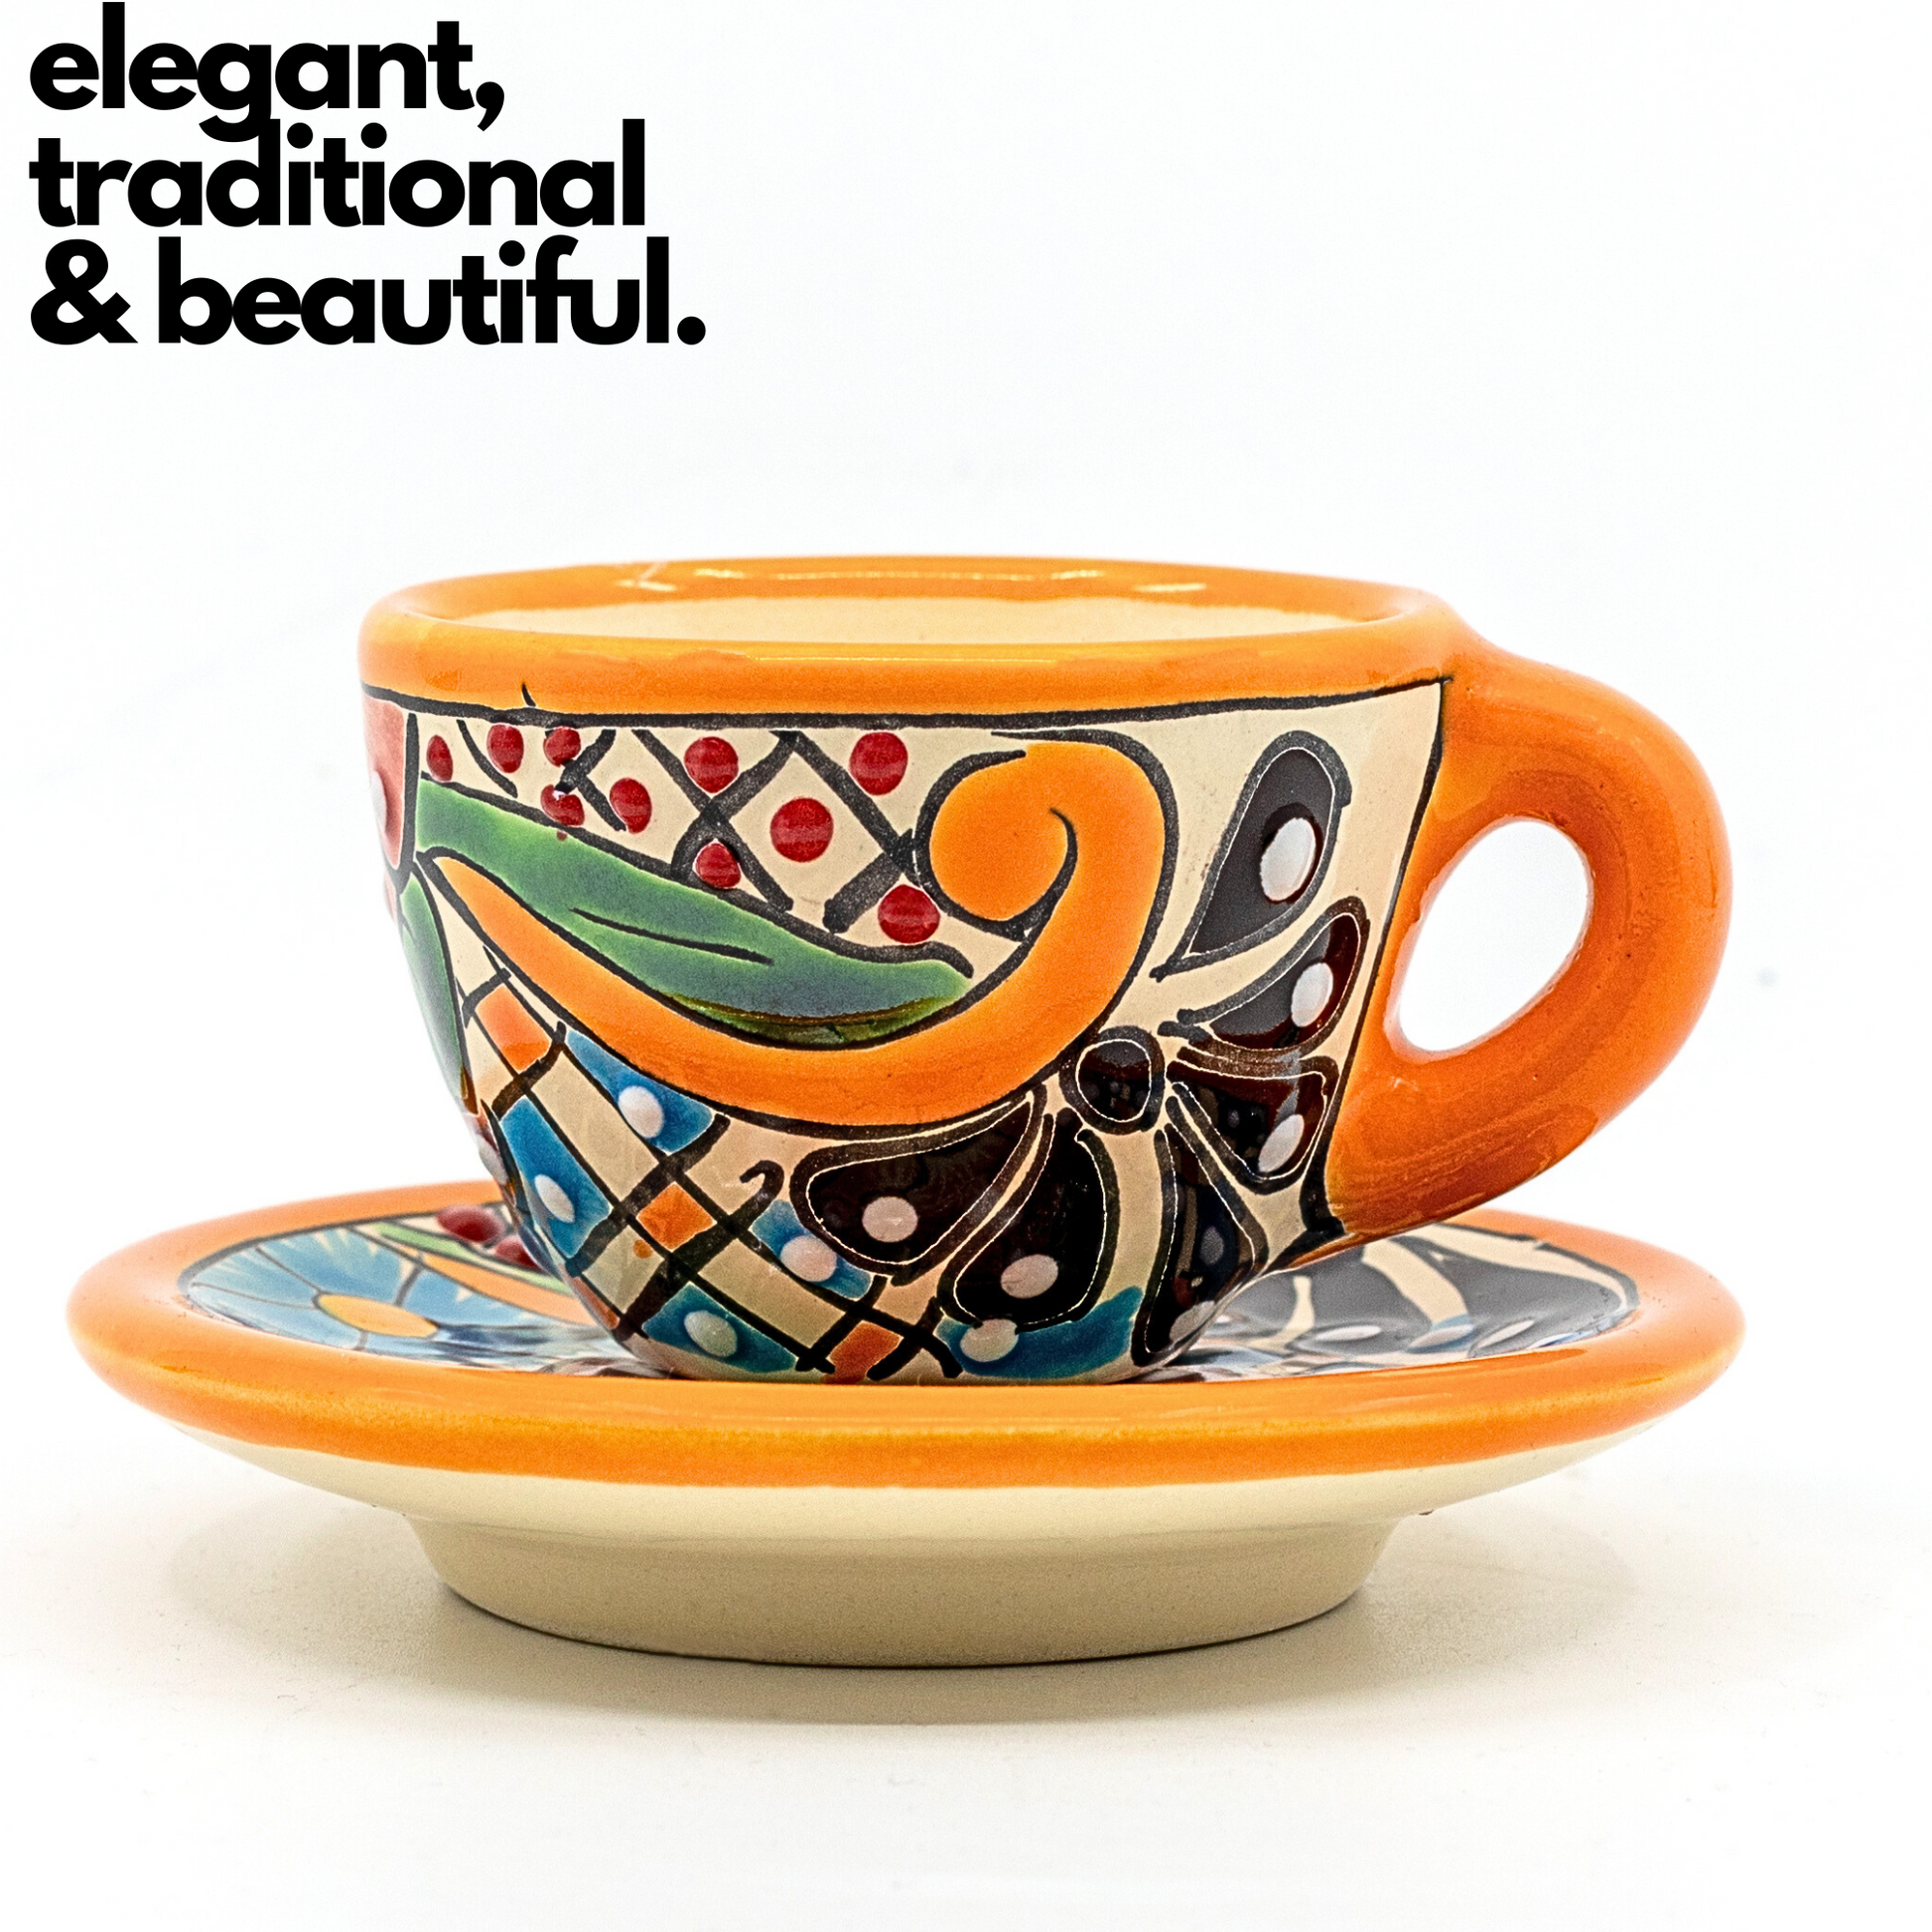 Handmade and hand-painted Mexican Talavera Ceramic Espresso Cup and Saucer set with vibrant floral pattern.